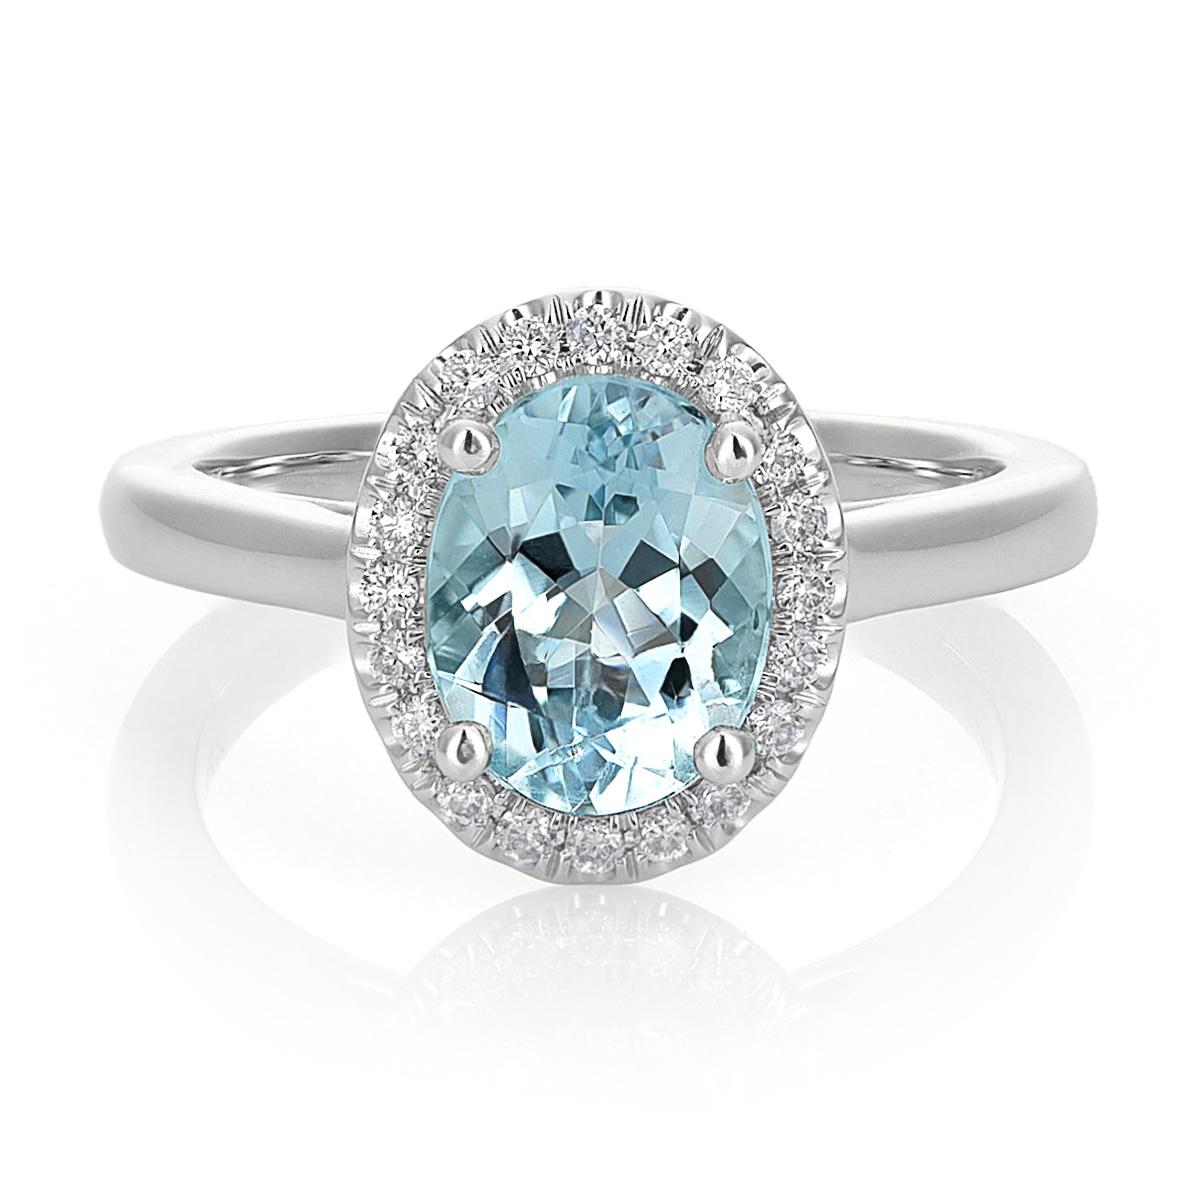 1.05 Carats Natural Aquamarine Diamonds set in 14K White Ring In New Condition For Sale In Los Angeles, CA